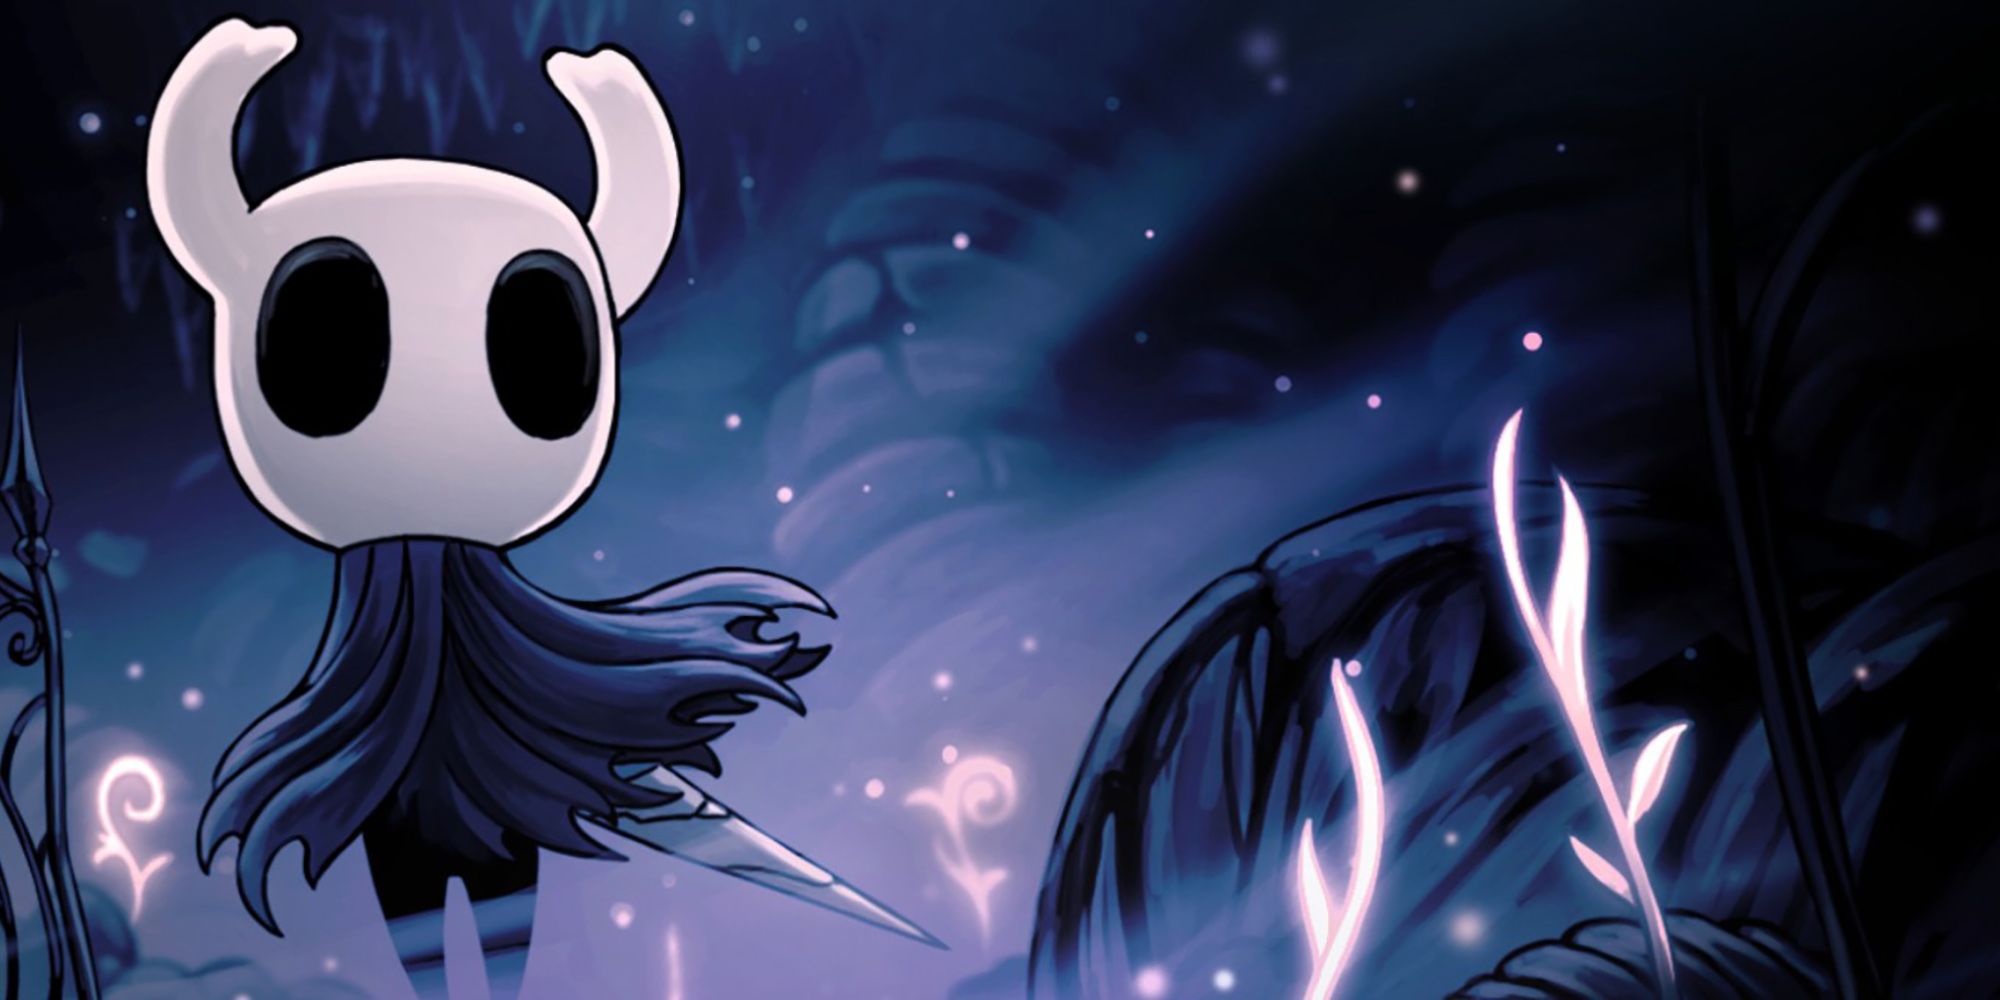 An Image From Hollow Knight